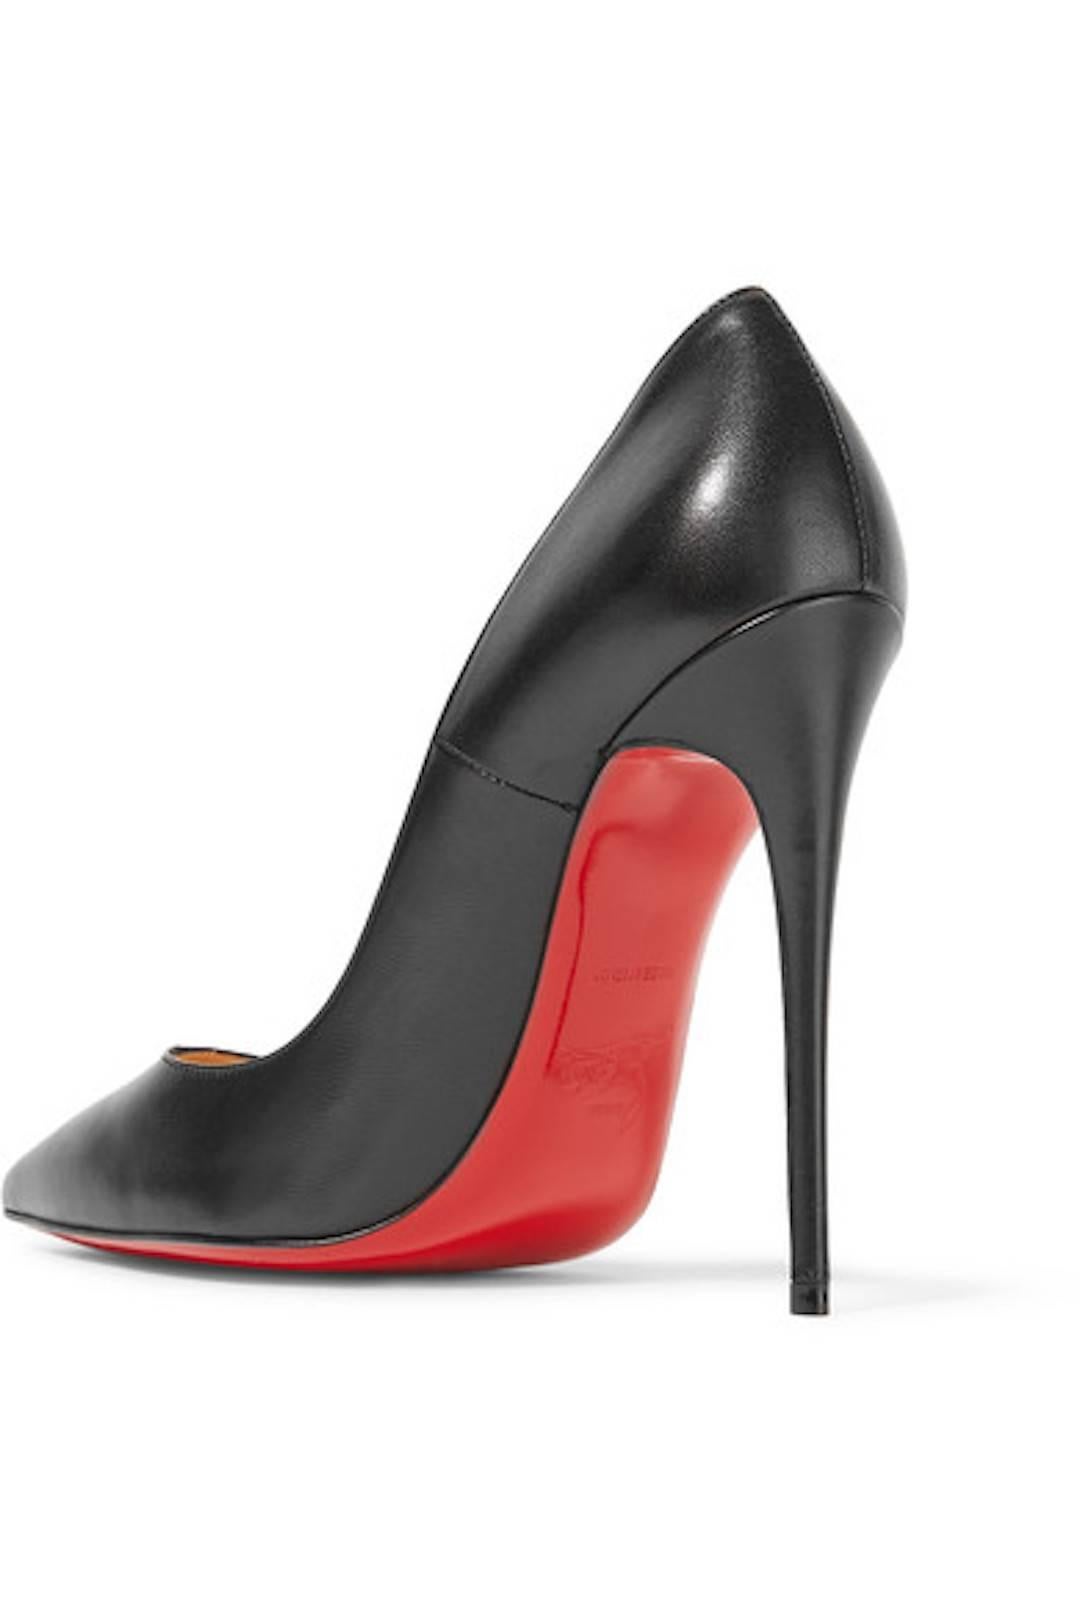 Christian Louboutin New Black Leather SO Kate High Heels Pumps in Box 1